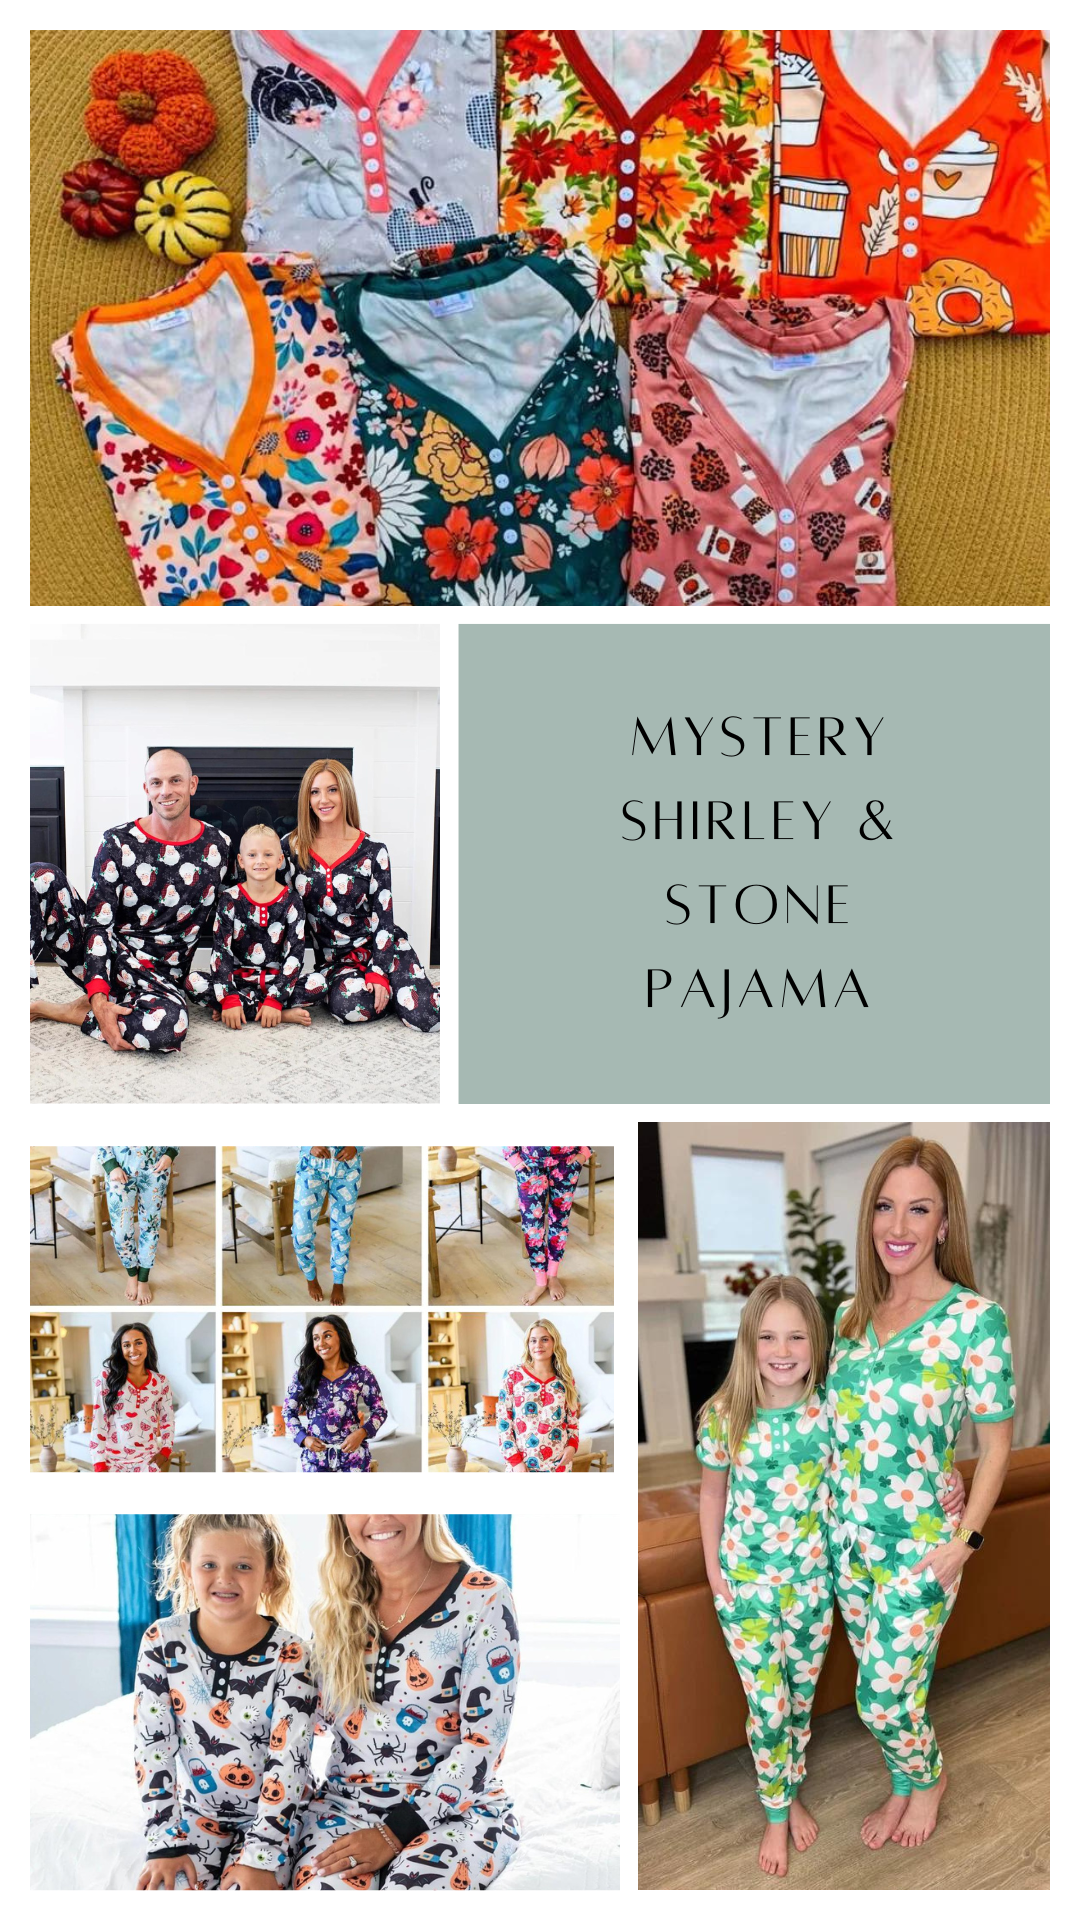 Mystery Pajama Set by Shirley & Stone (Ships in 1-2 weeks)